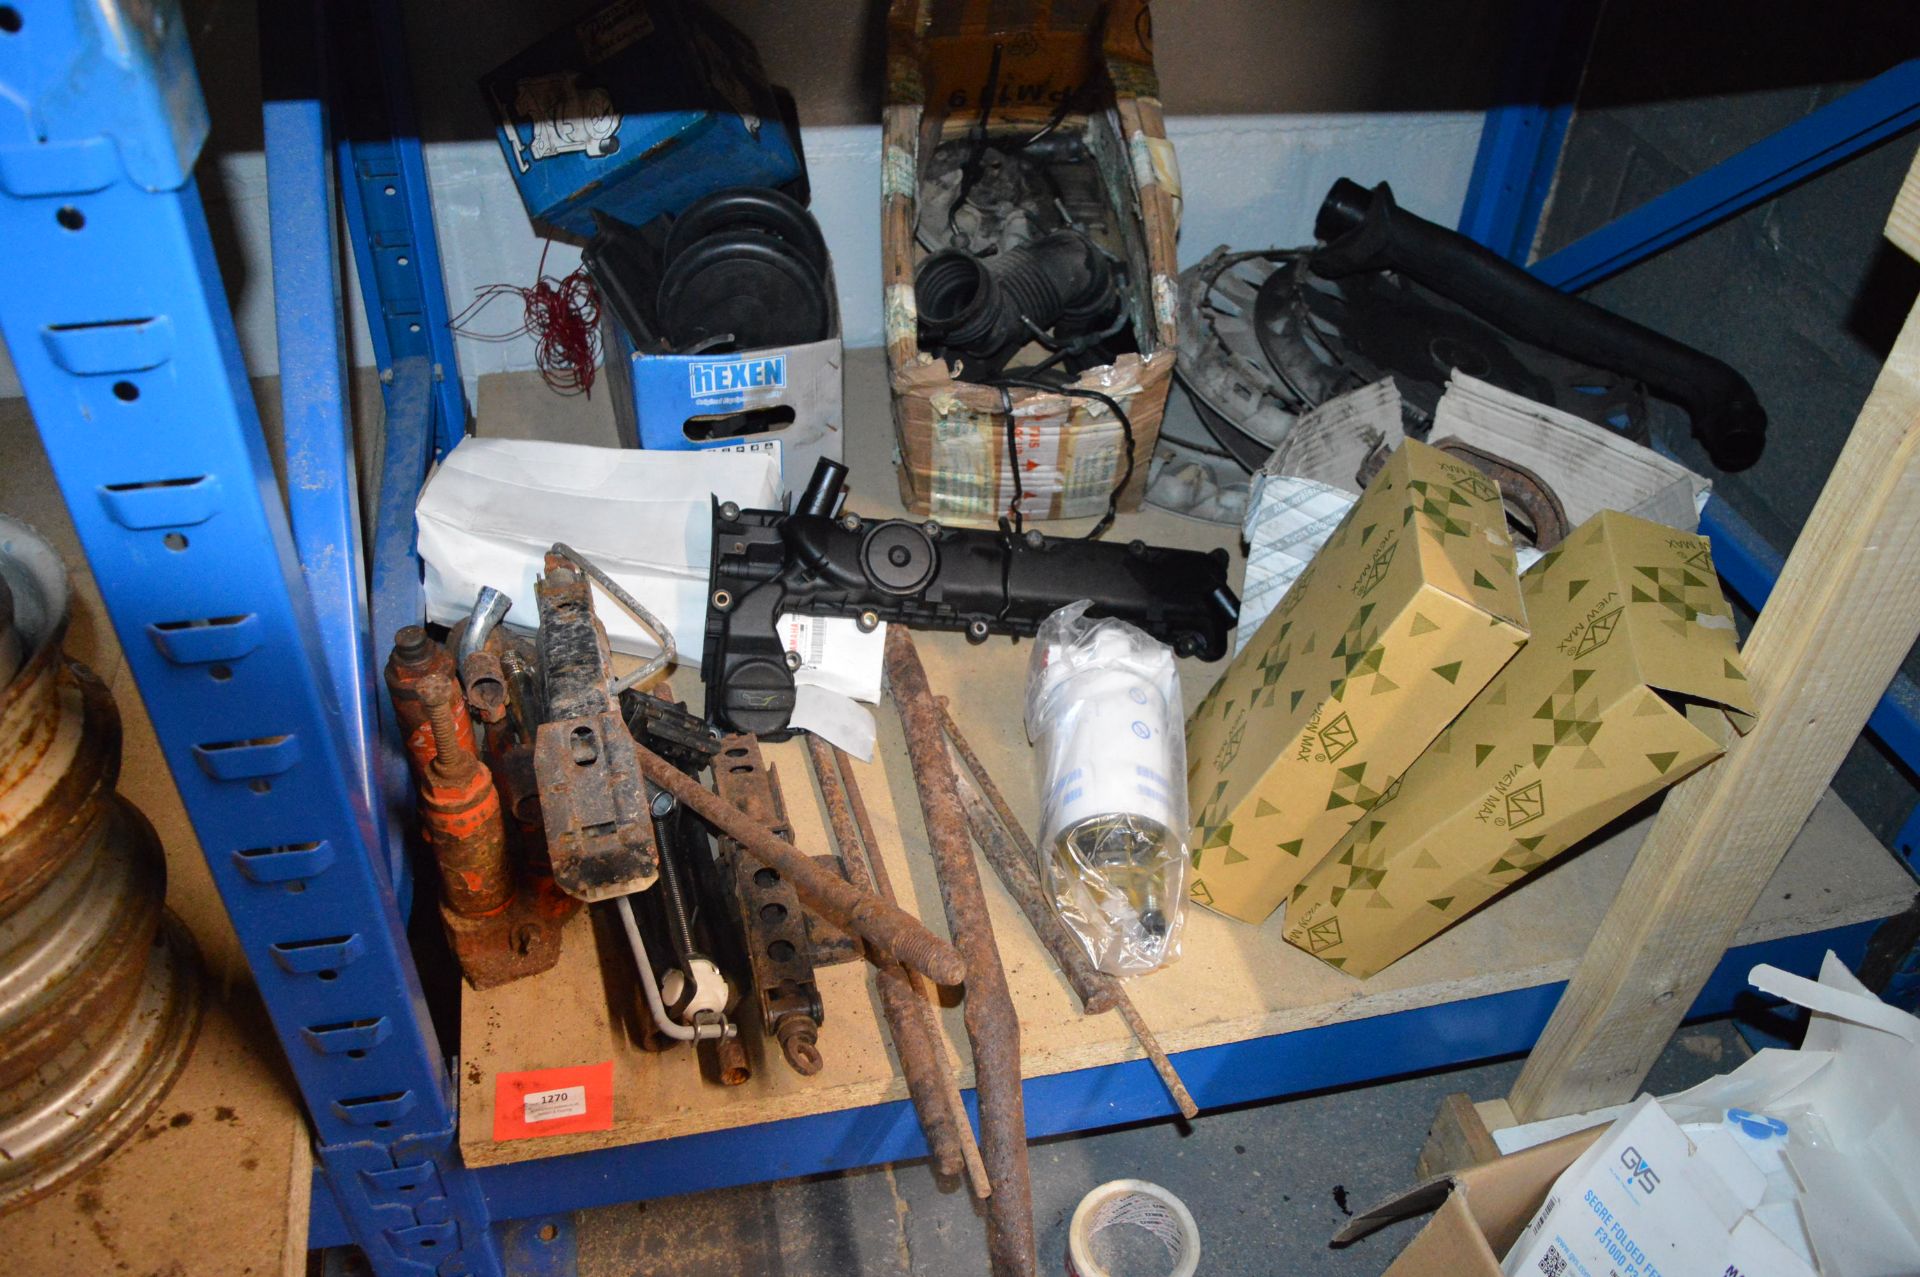 Contents of Shelf to Include Jacks, Bottle Jacks, Filter Separator, and Various Car Parts